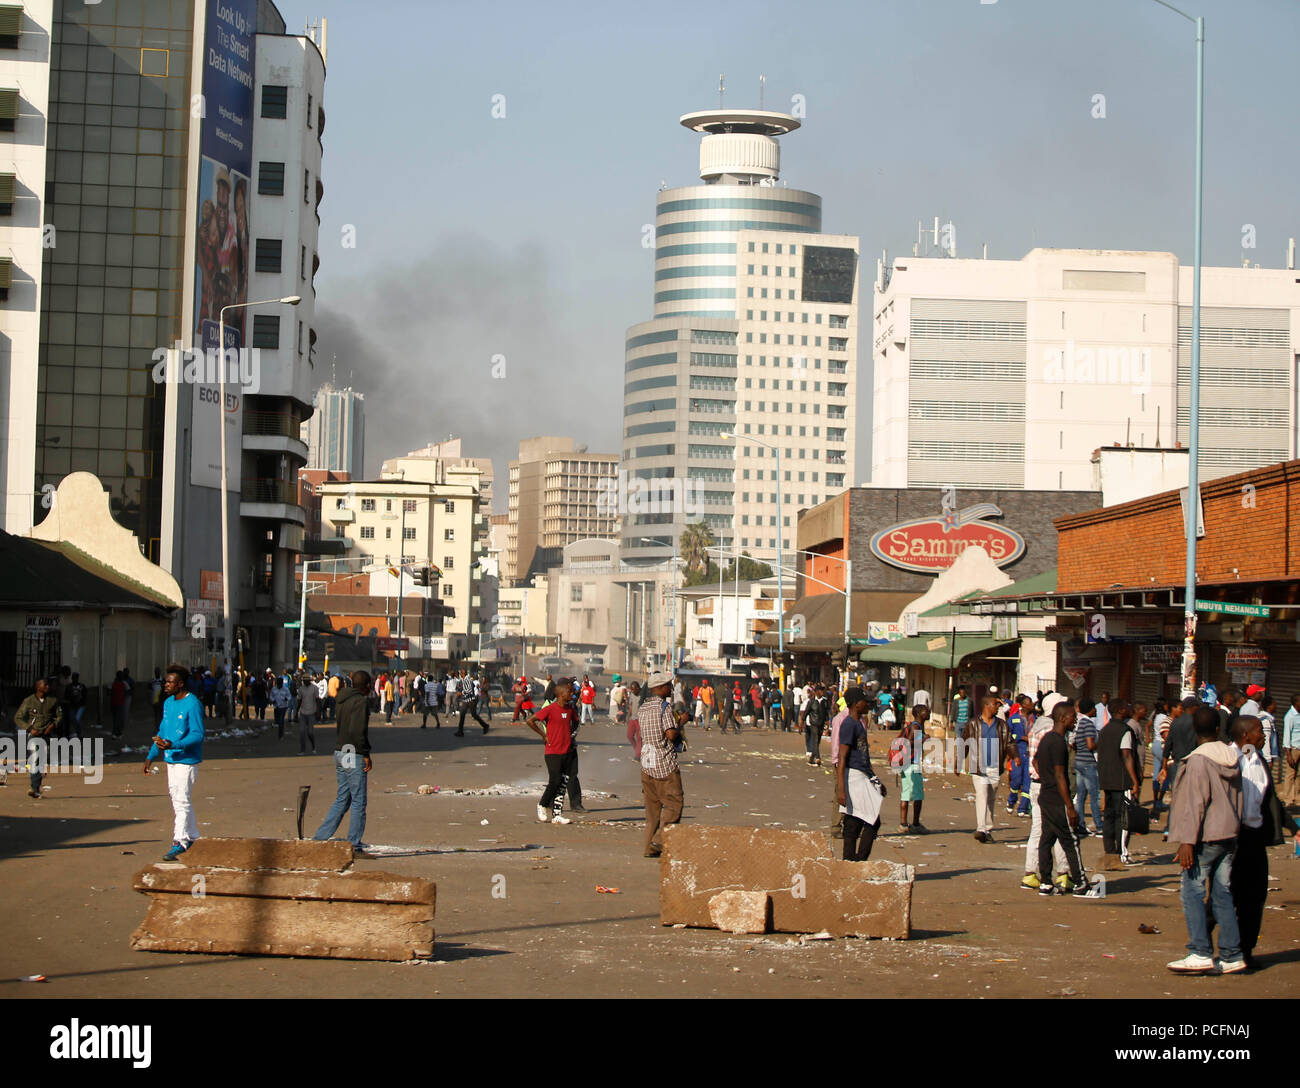 Harare, Zimbabwe. 1st Aug, 2018. Supporters of the opposition MDC Alliance attend a protest in Harare, Zimbabwe, Aug. 1, 2018. Three people died and scores of others were injured Wednesday when protesting opposition supporters clashed with army and police in the capital Harare. Scores of opposition supporters took to the streets of Harare to protest against the delay in announcement of presidential election results as well as alleged rigging of the vote. Credit: Shaun Jusa/Xinhua/Alamy Live News Stock Photo